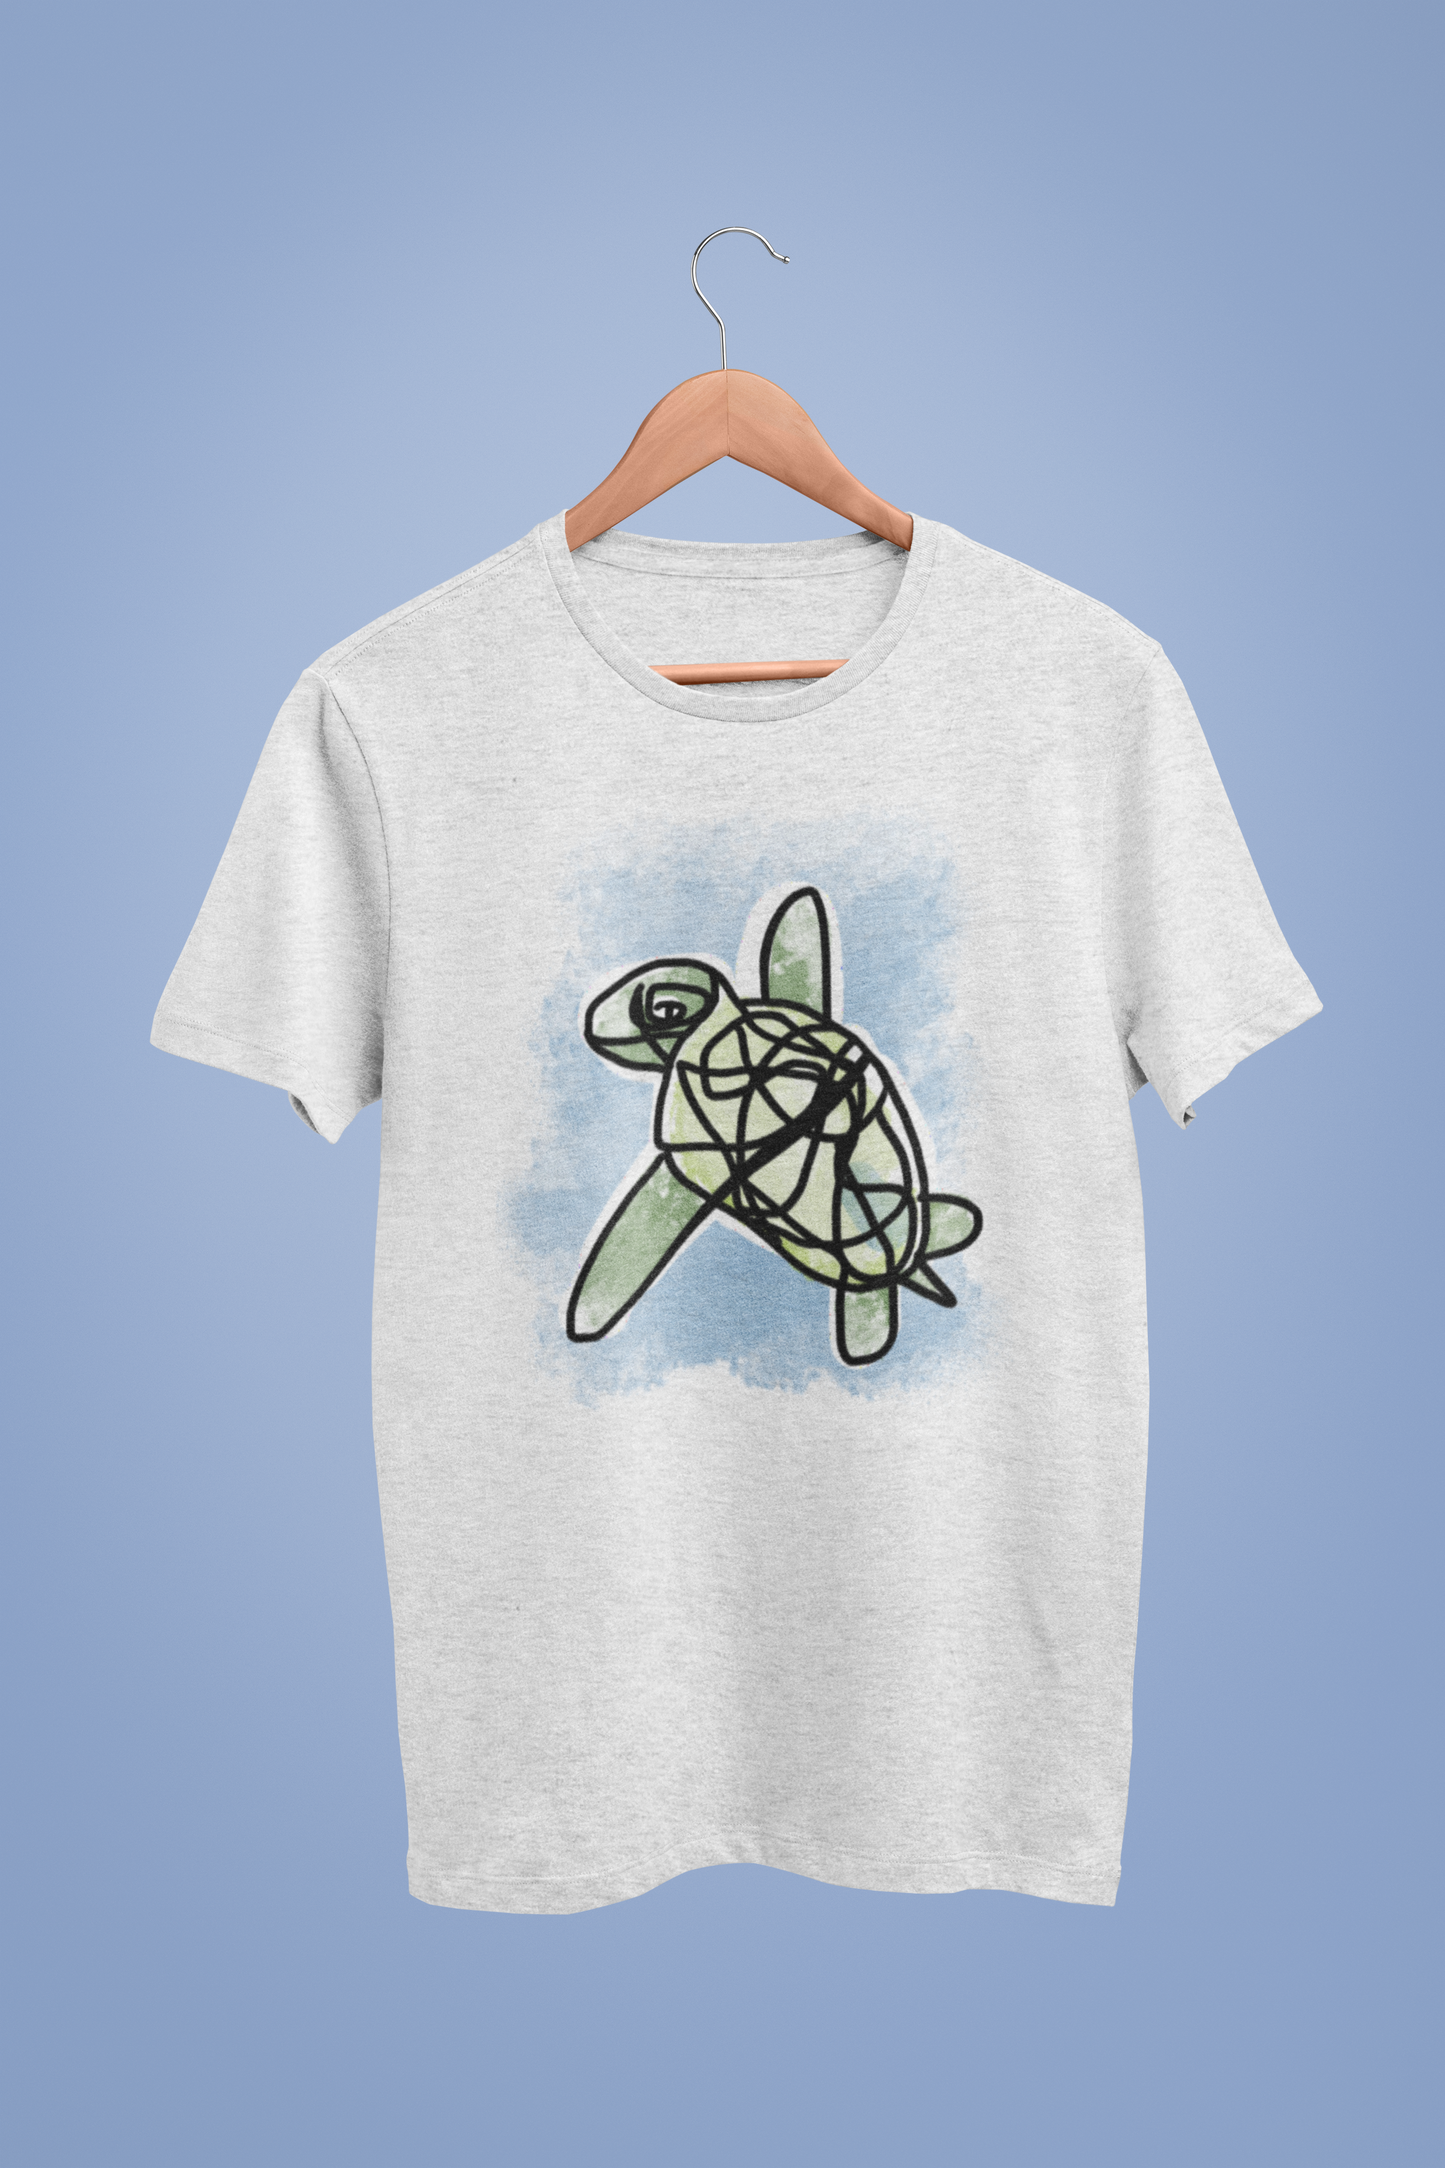 Sea Turtle T-shirt - Illustrated Green Sea Turtle T-shirts - Endangered species wildlife conservation - Quality heather grey vegan cotton turtle t-shirts by Hector and Bone